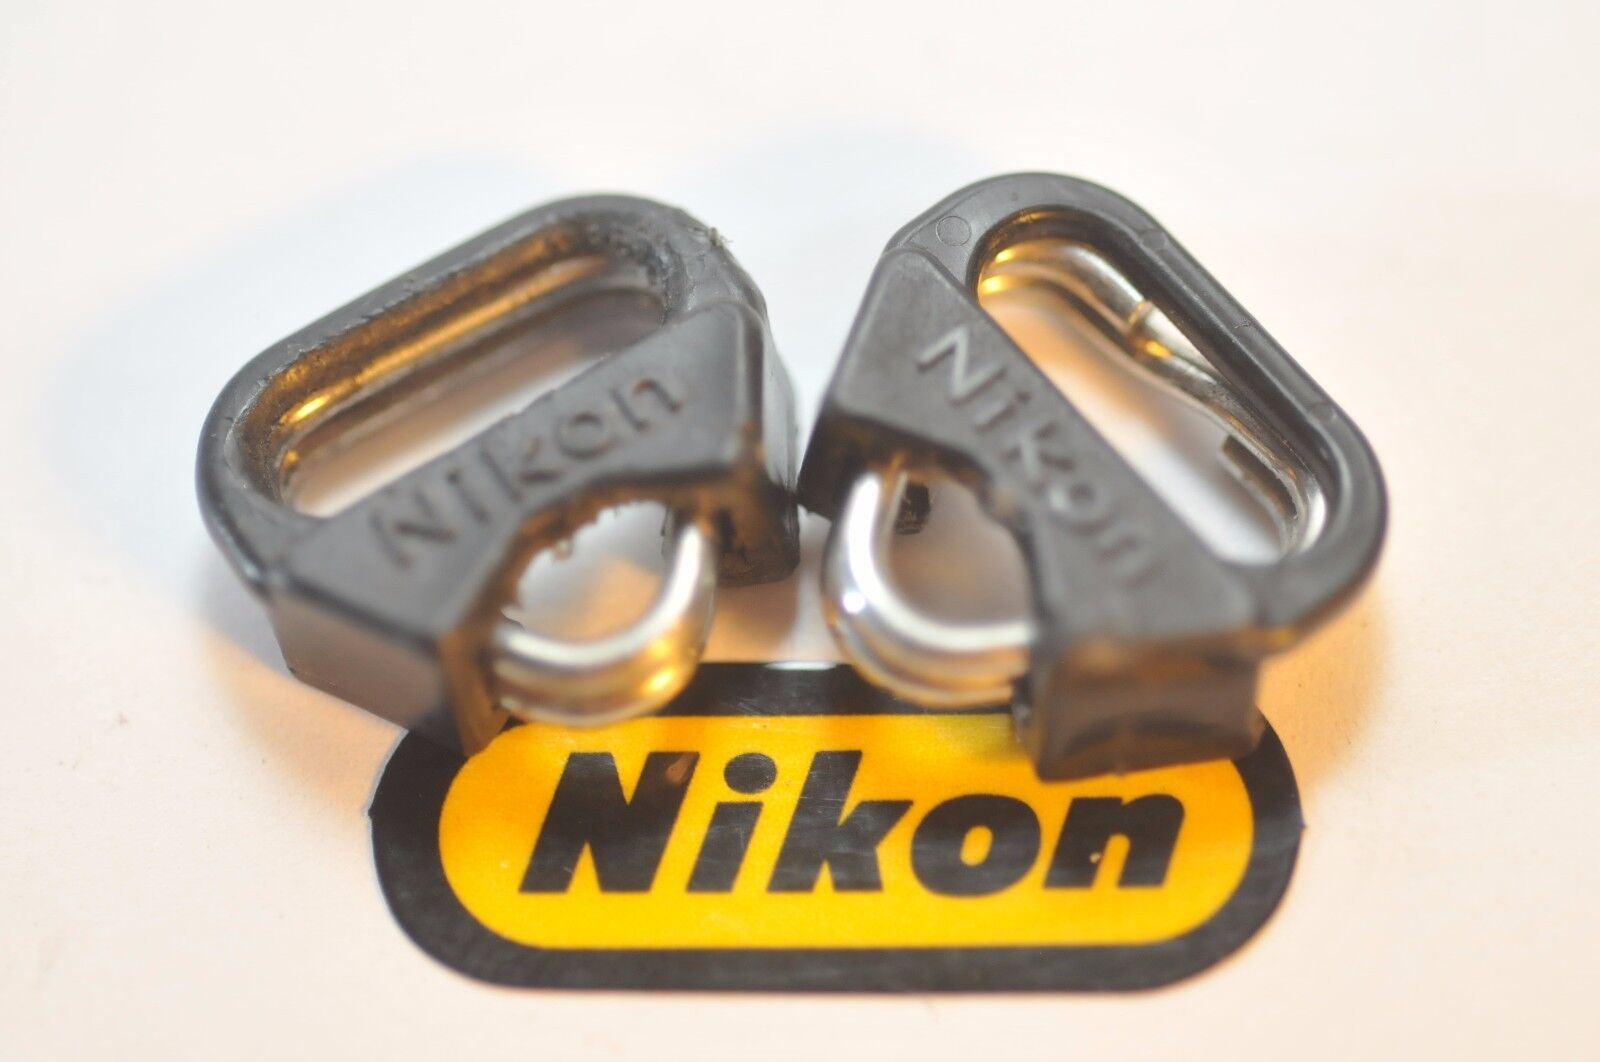 Nikon Triangular Strap lug rings and covers SET of 2 TWO for FM2 F100 D750 DF F5 Nikon Does not apply